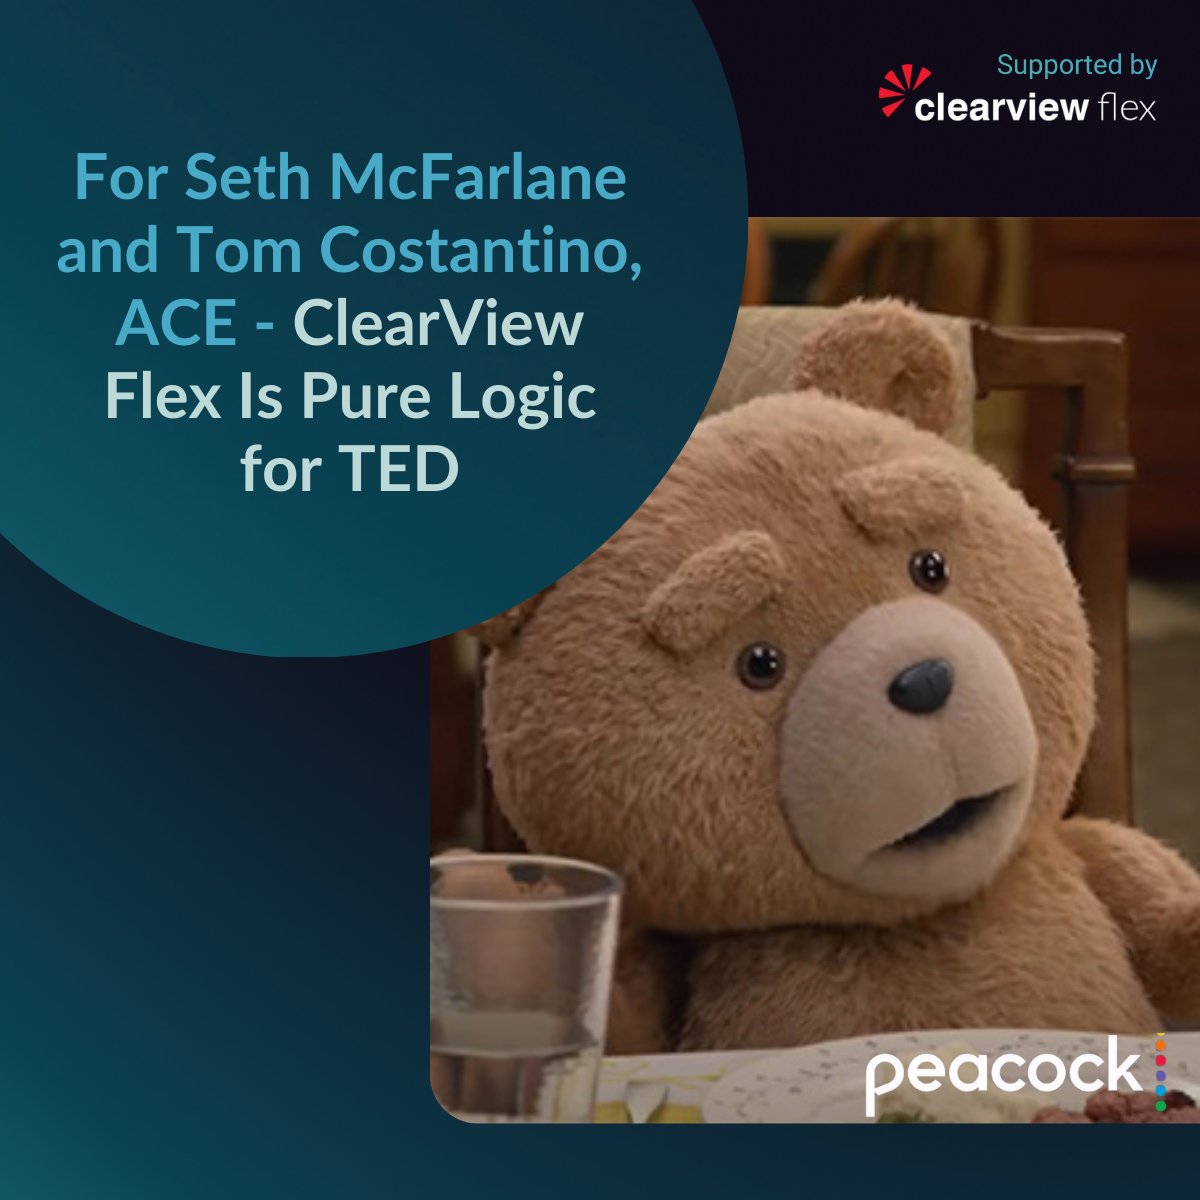 Lead Editor and Co-Producer Tom Costantino, ACE on how Sohonet supports the Fuzzy Door creative team with remote collaboration tools on TED and THE ORVILLE #clearviewflex #TED #Orville #remotecollaboration Read here ➡️ ow.ly/JZwj50QqUtF @SethMacFarlane @TomCostantino Read